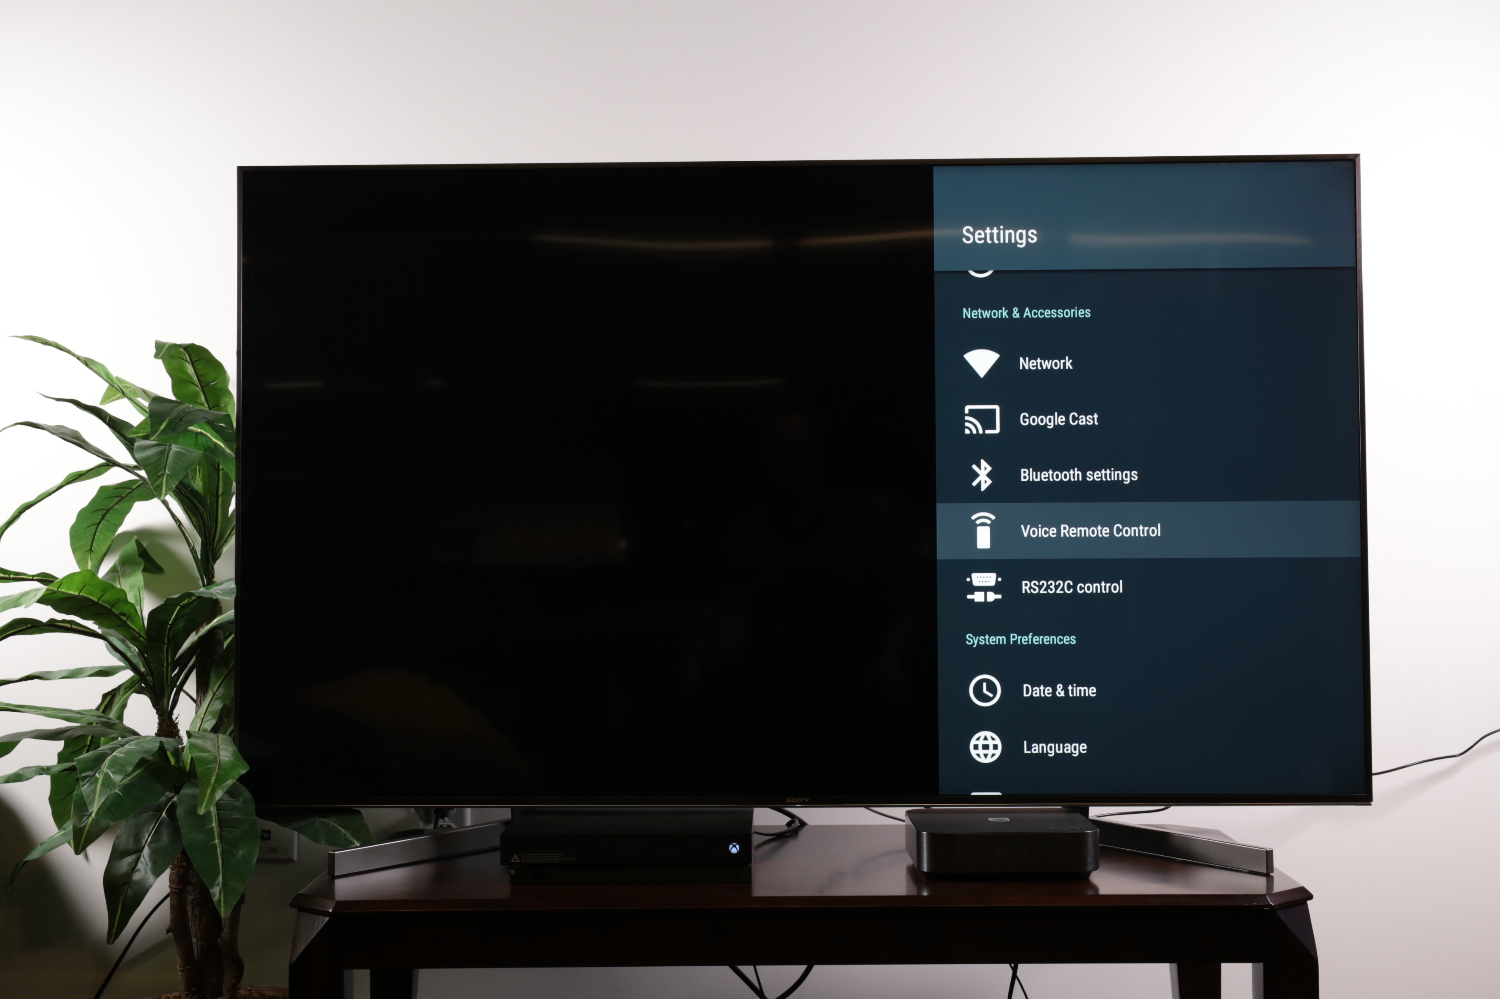 Get to know the Home Screen and Settings on your Sony TV - Sony Bravia